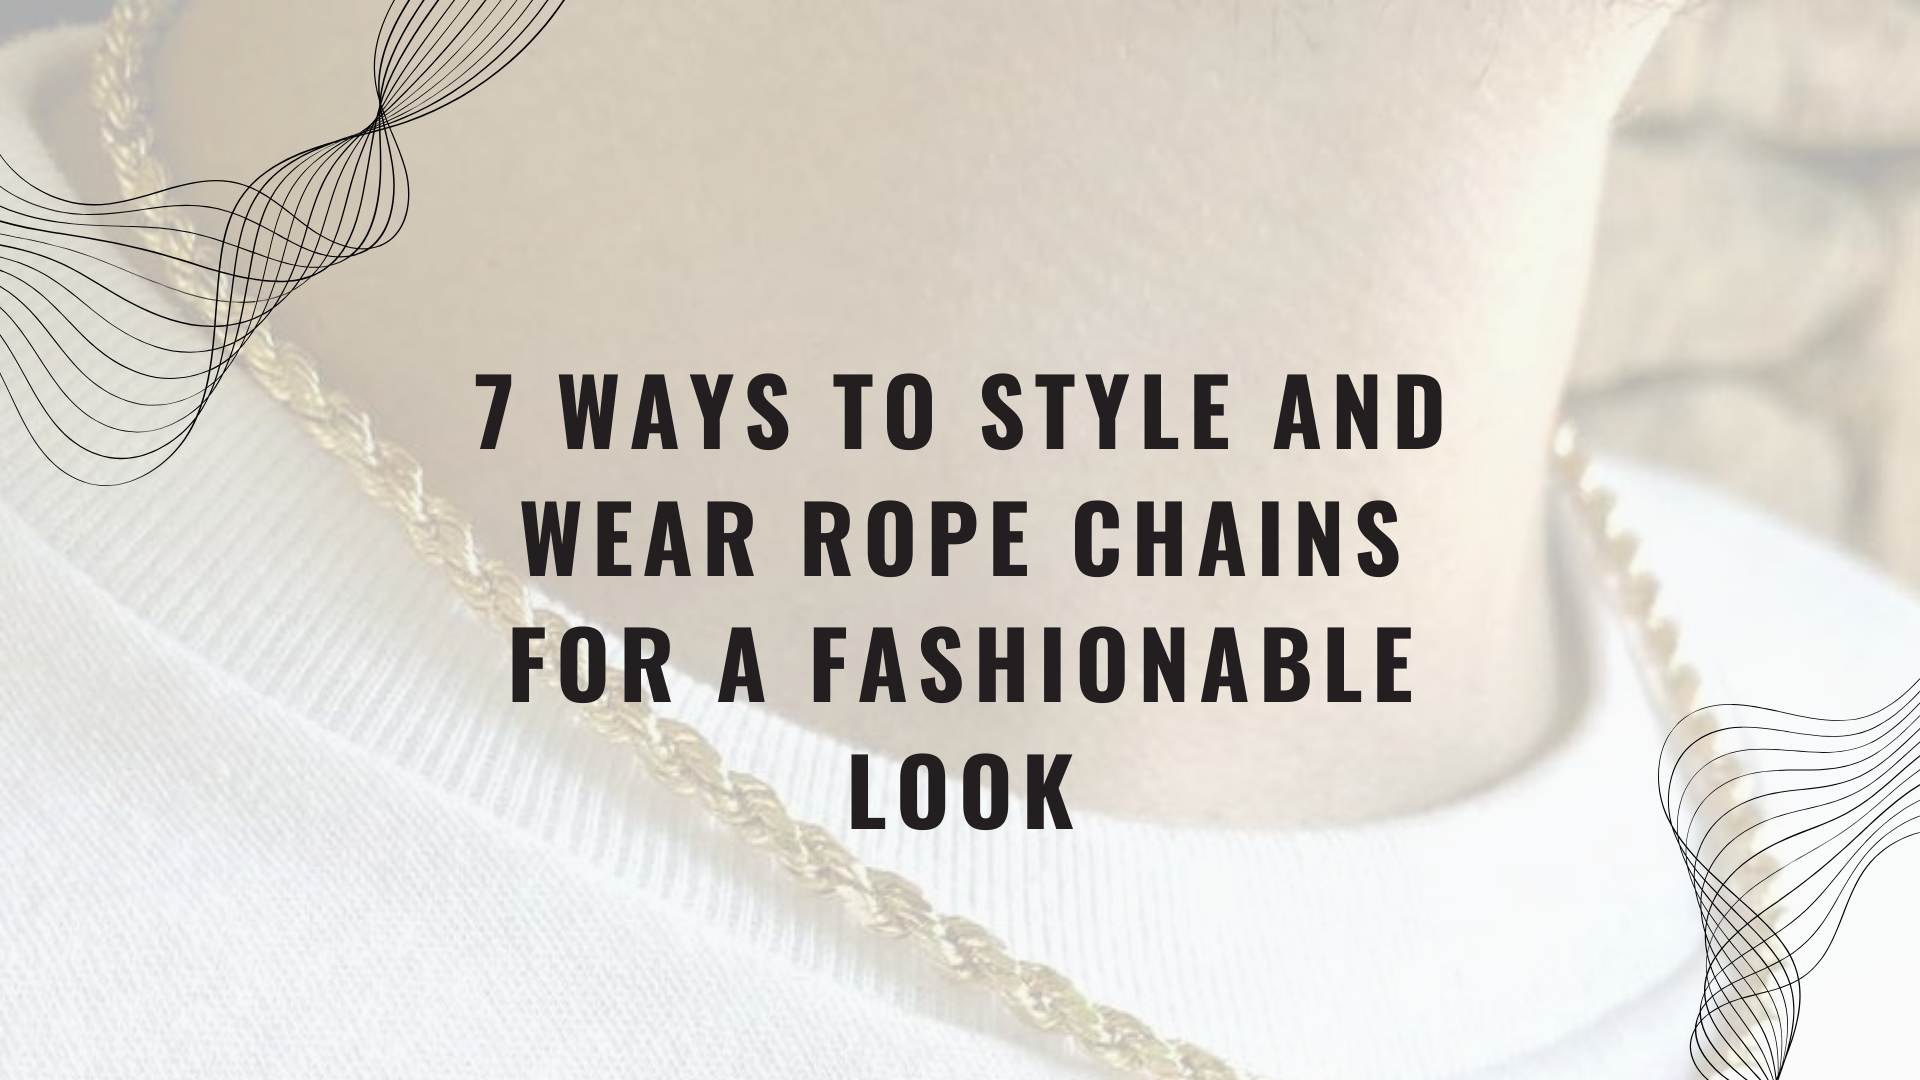 7 Ways to Style and Wear Rope Chains for a Fashionable Look